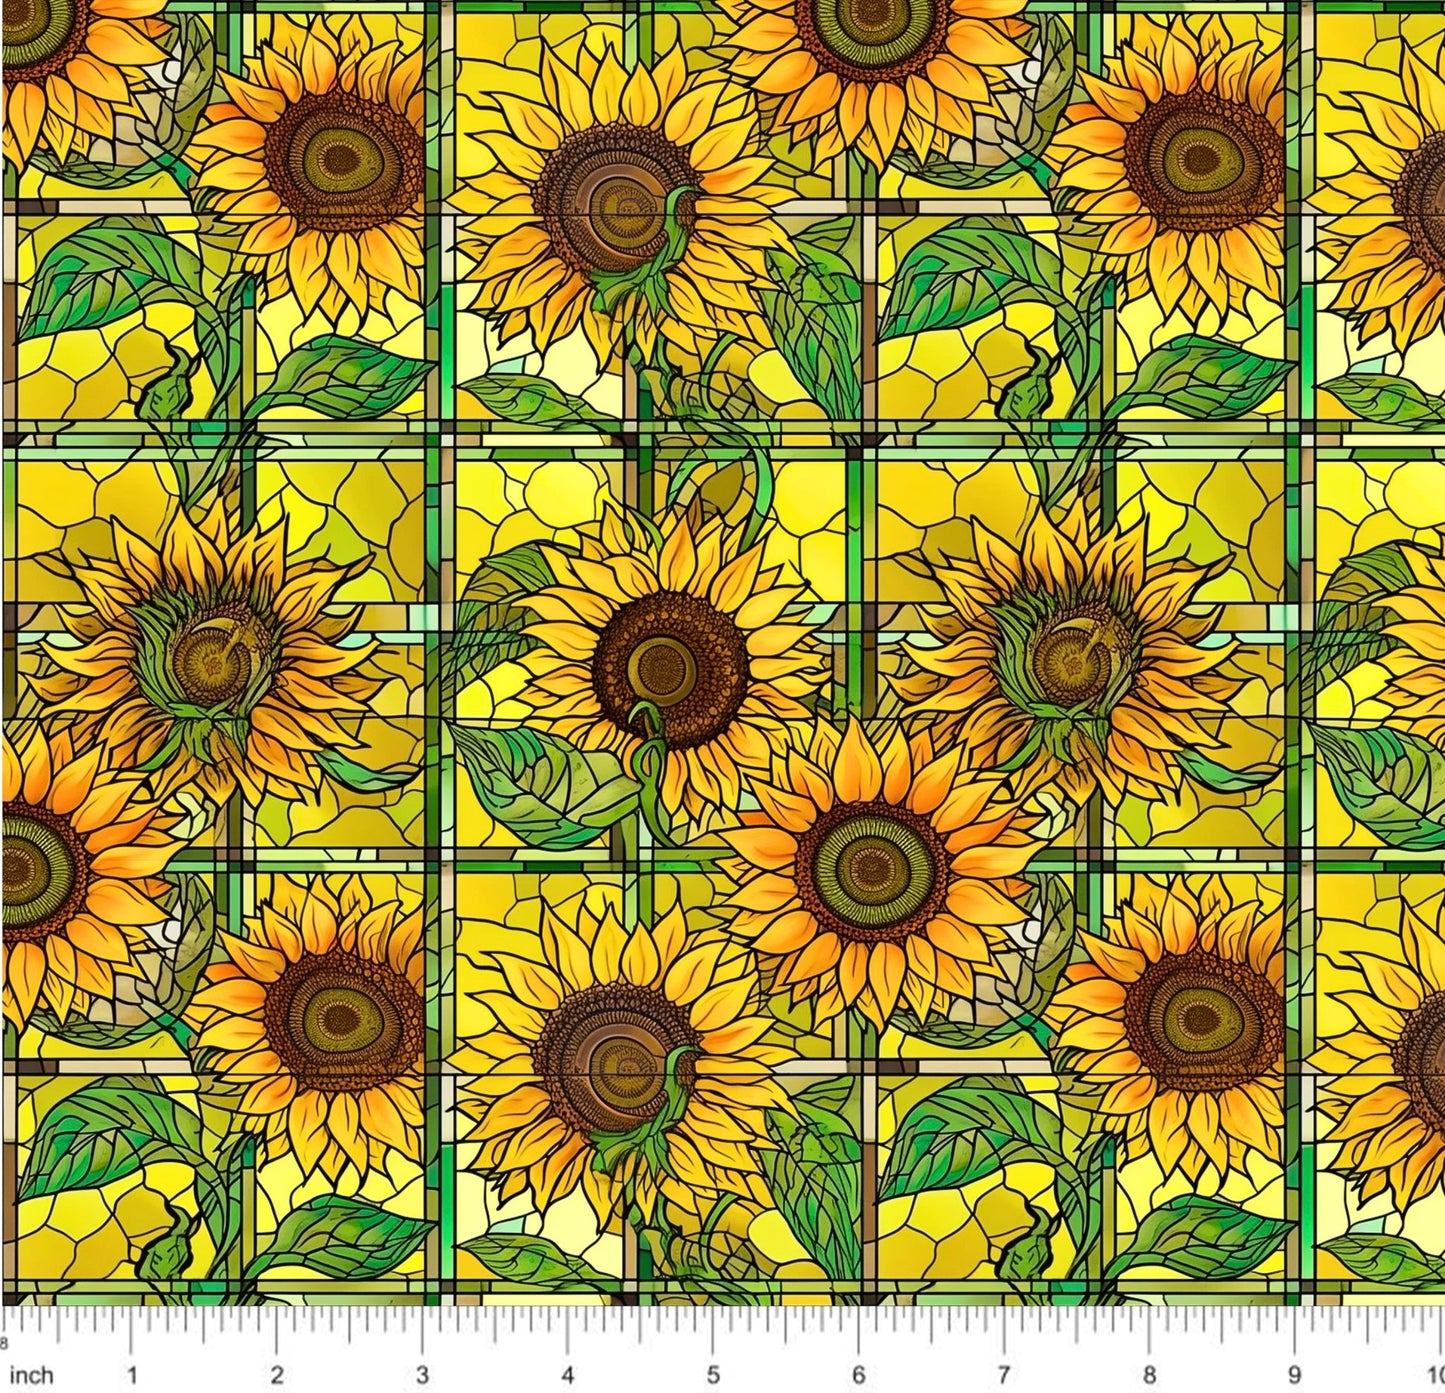 Bonnie's Boujee Designs - Sunflower Stained Glass - Little Rhody Sewing Co.